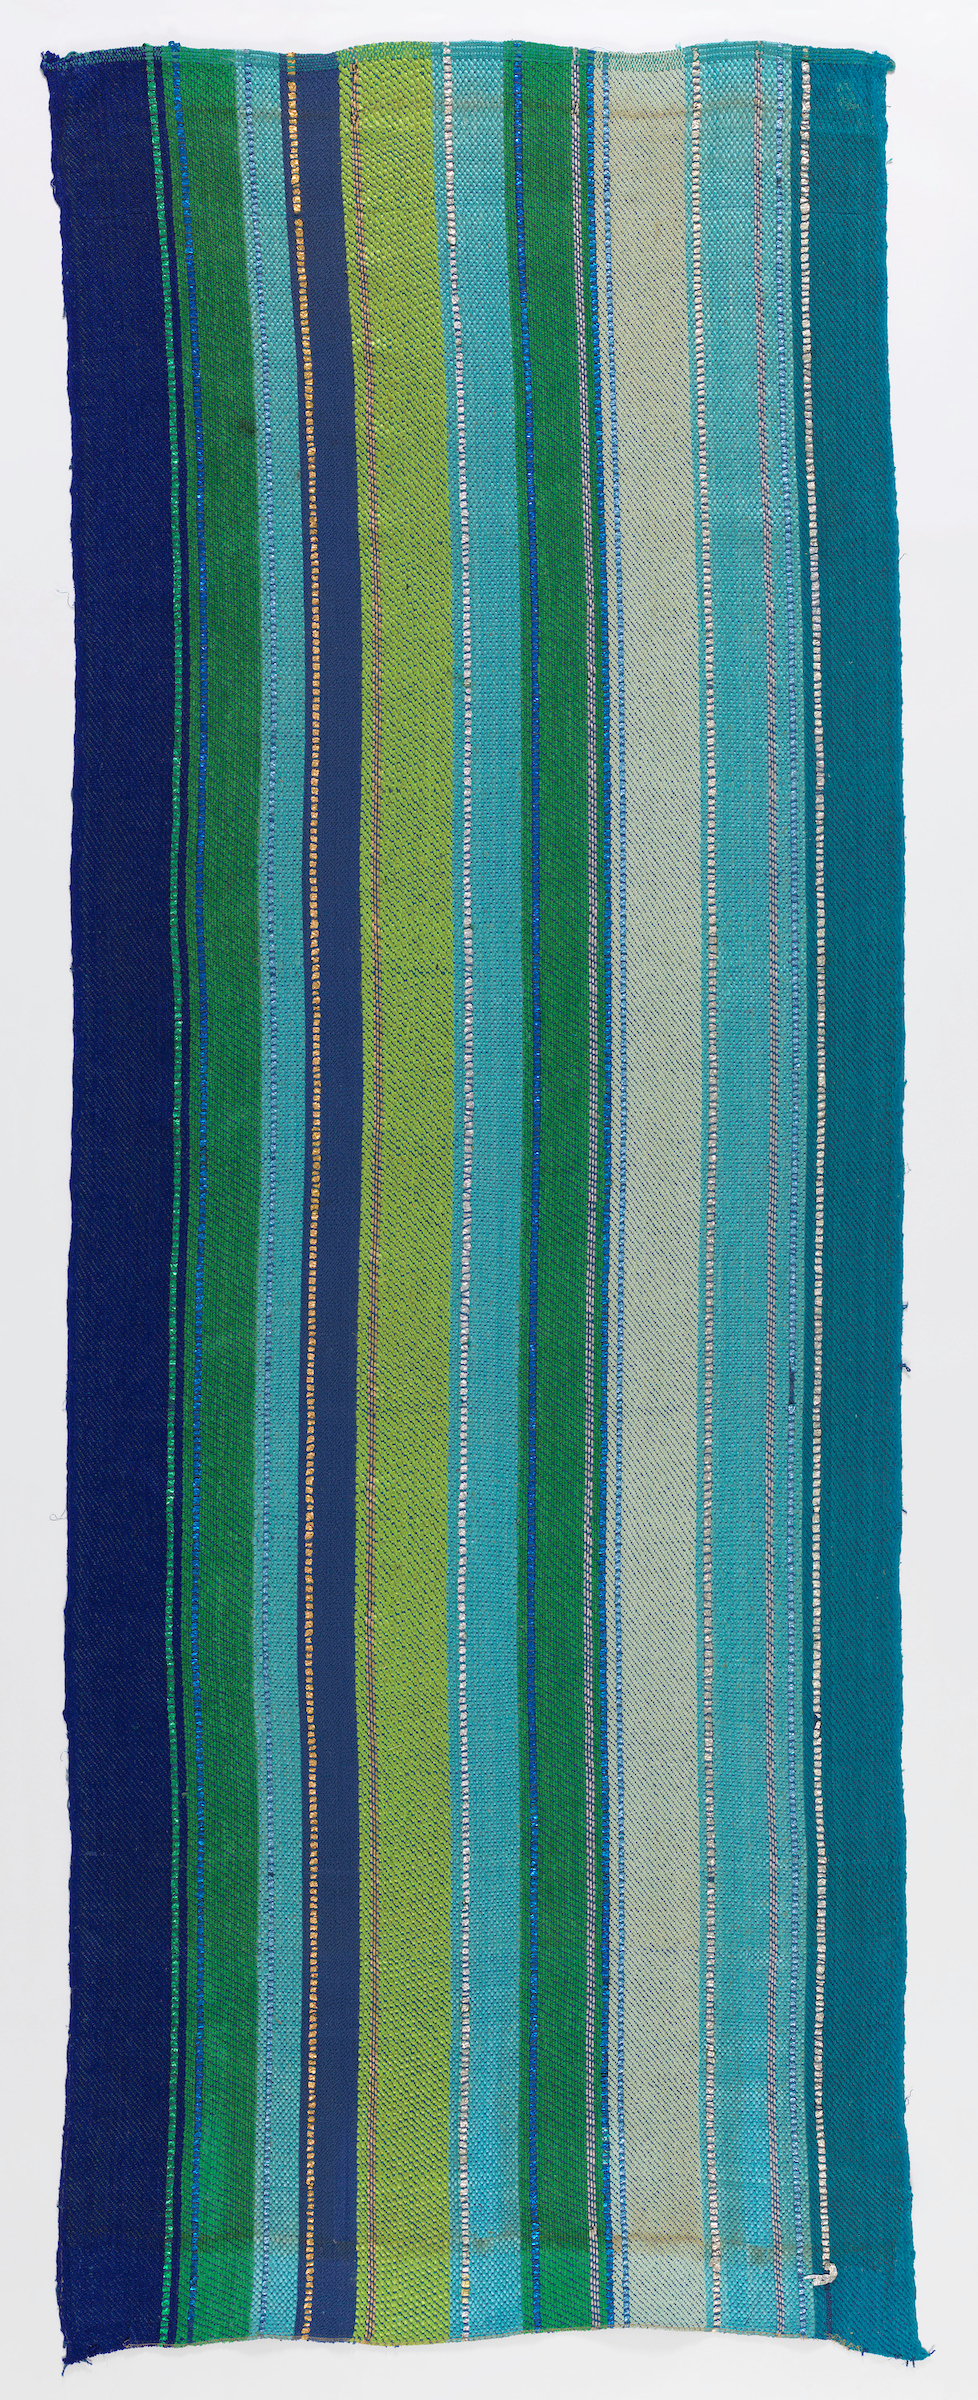 Dorothy Liebes, Handwoven panel for the Observation Lounge of the <em>SS United States</em> (1952). Collection of the Cooper Hewitt, Smithsonian Design Museum, New York, gift of the estate of Dorothy Liebes Morin. Photo by Matt Flynn ©Smithsonian Institution.